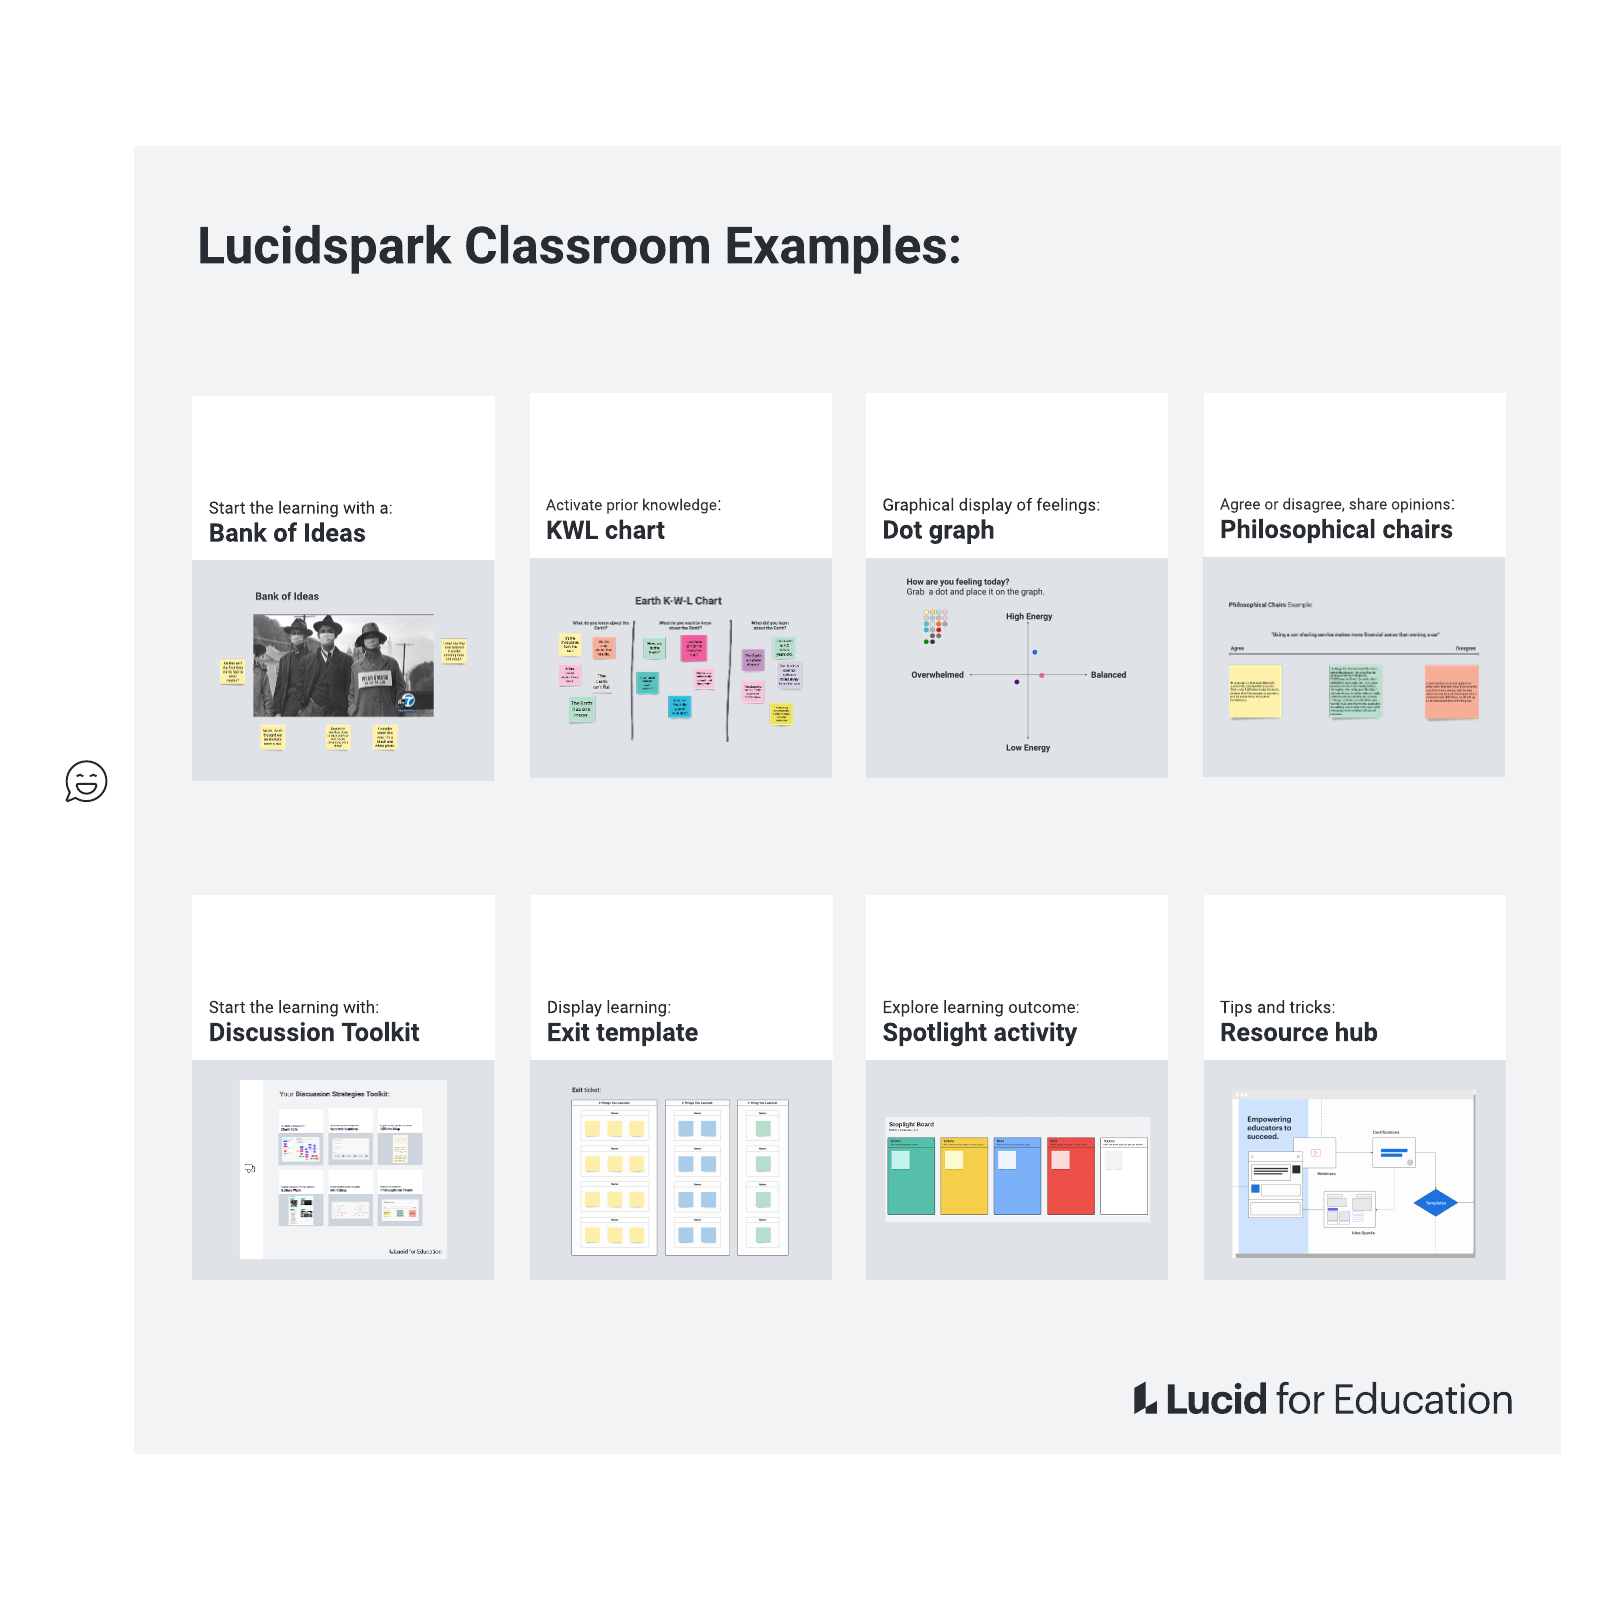 Lucidspark Classroom Examples example